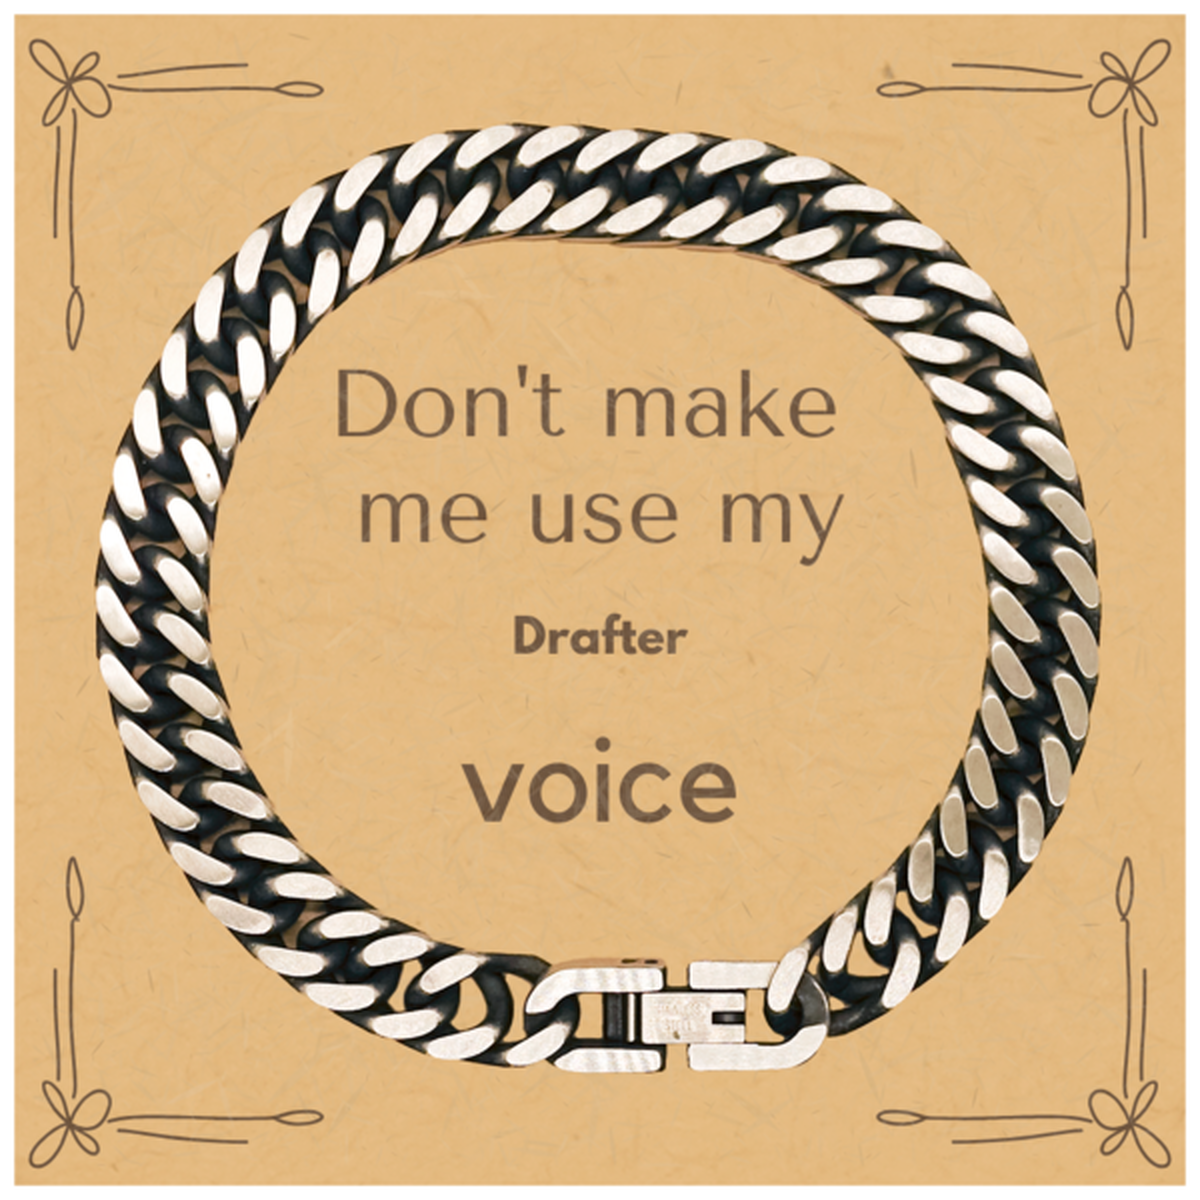 Don't make me use my Drafter voice, Sarcasm Drafter Card Gifts, Christmas Drafter Cuban Link Chain Bracelet Birthday Unique Gifts For Drafter Coworkers, Men, Women, Colleague, Friends